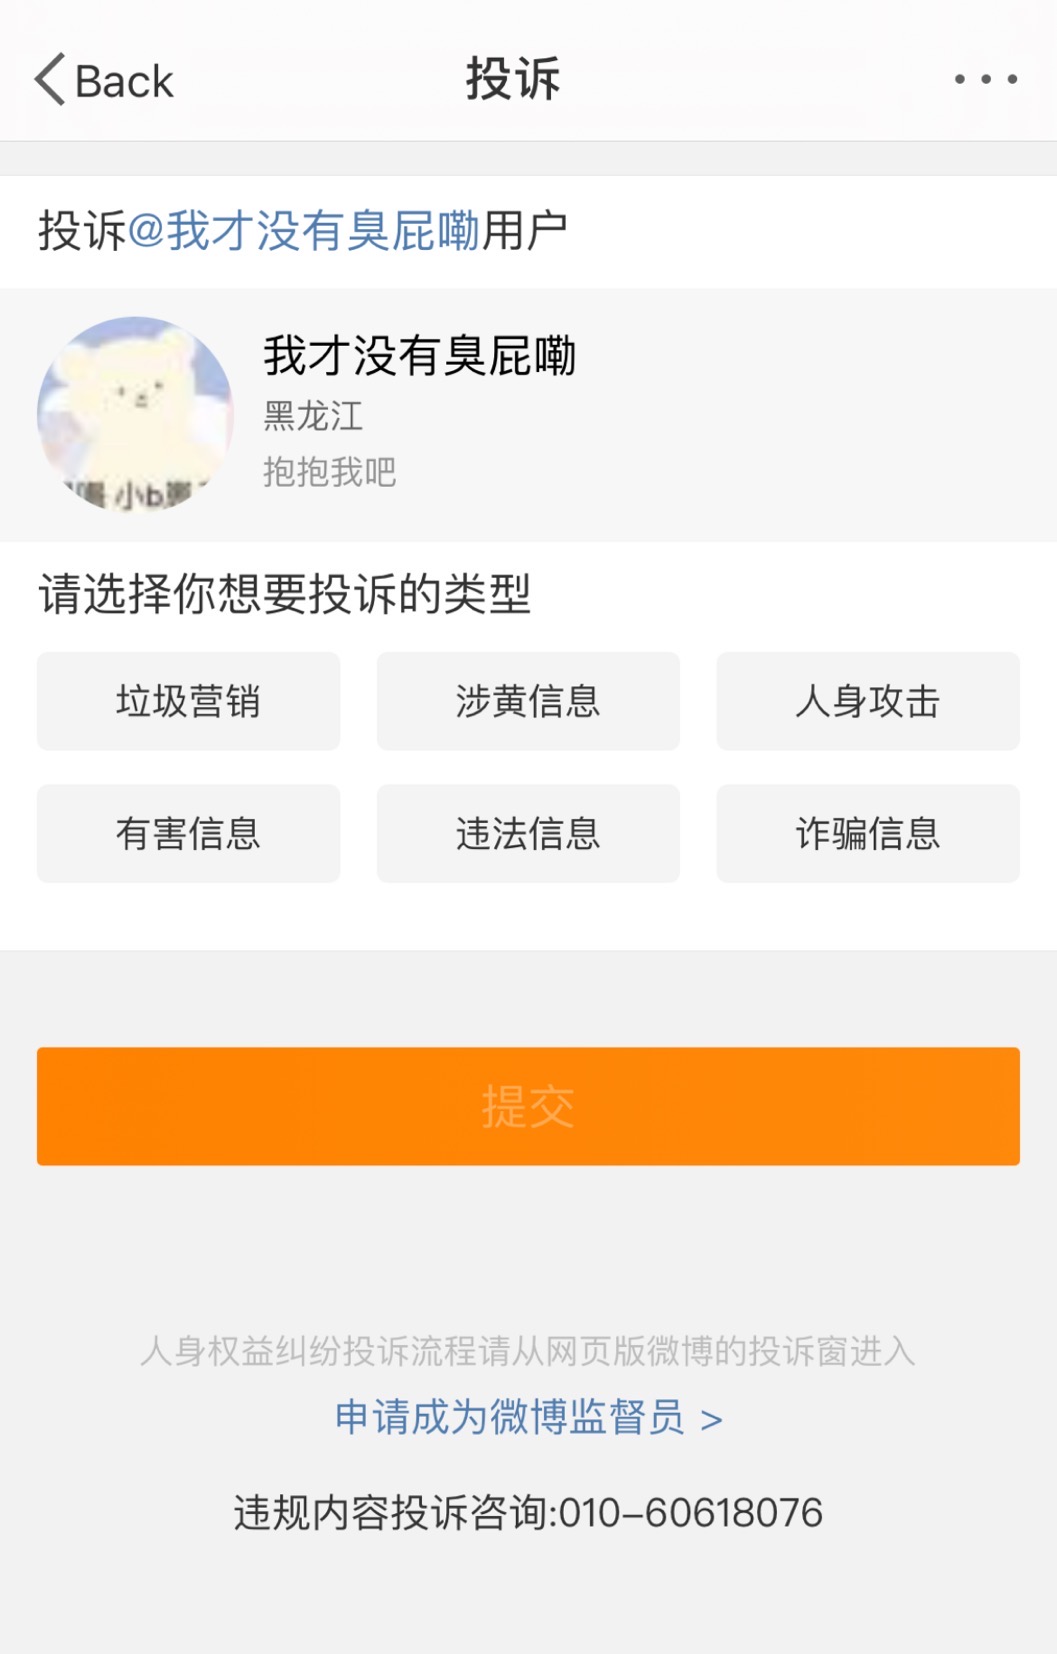 screen capture of a Weibo reporting page